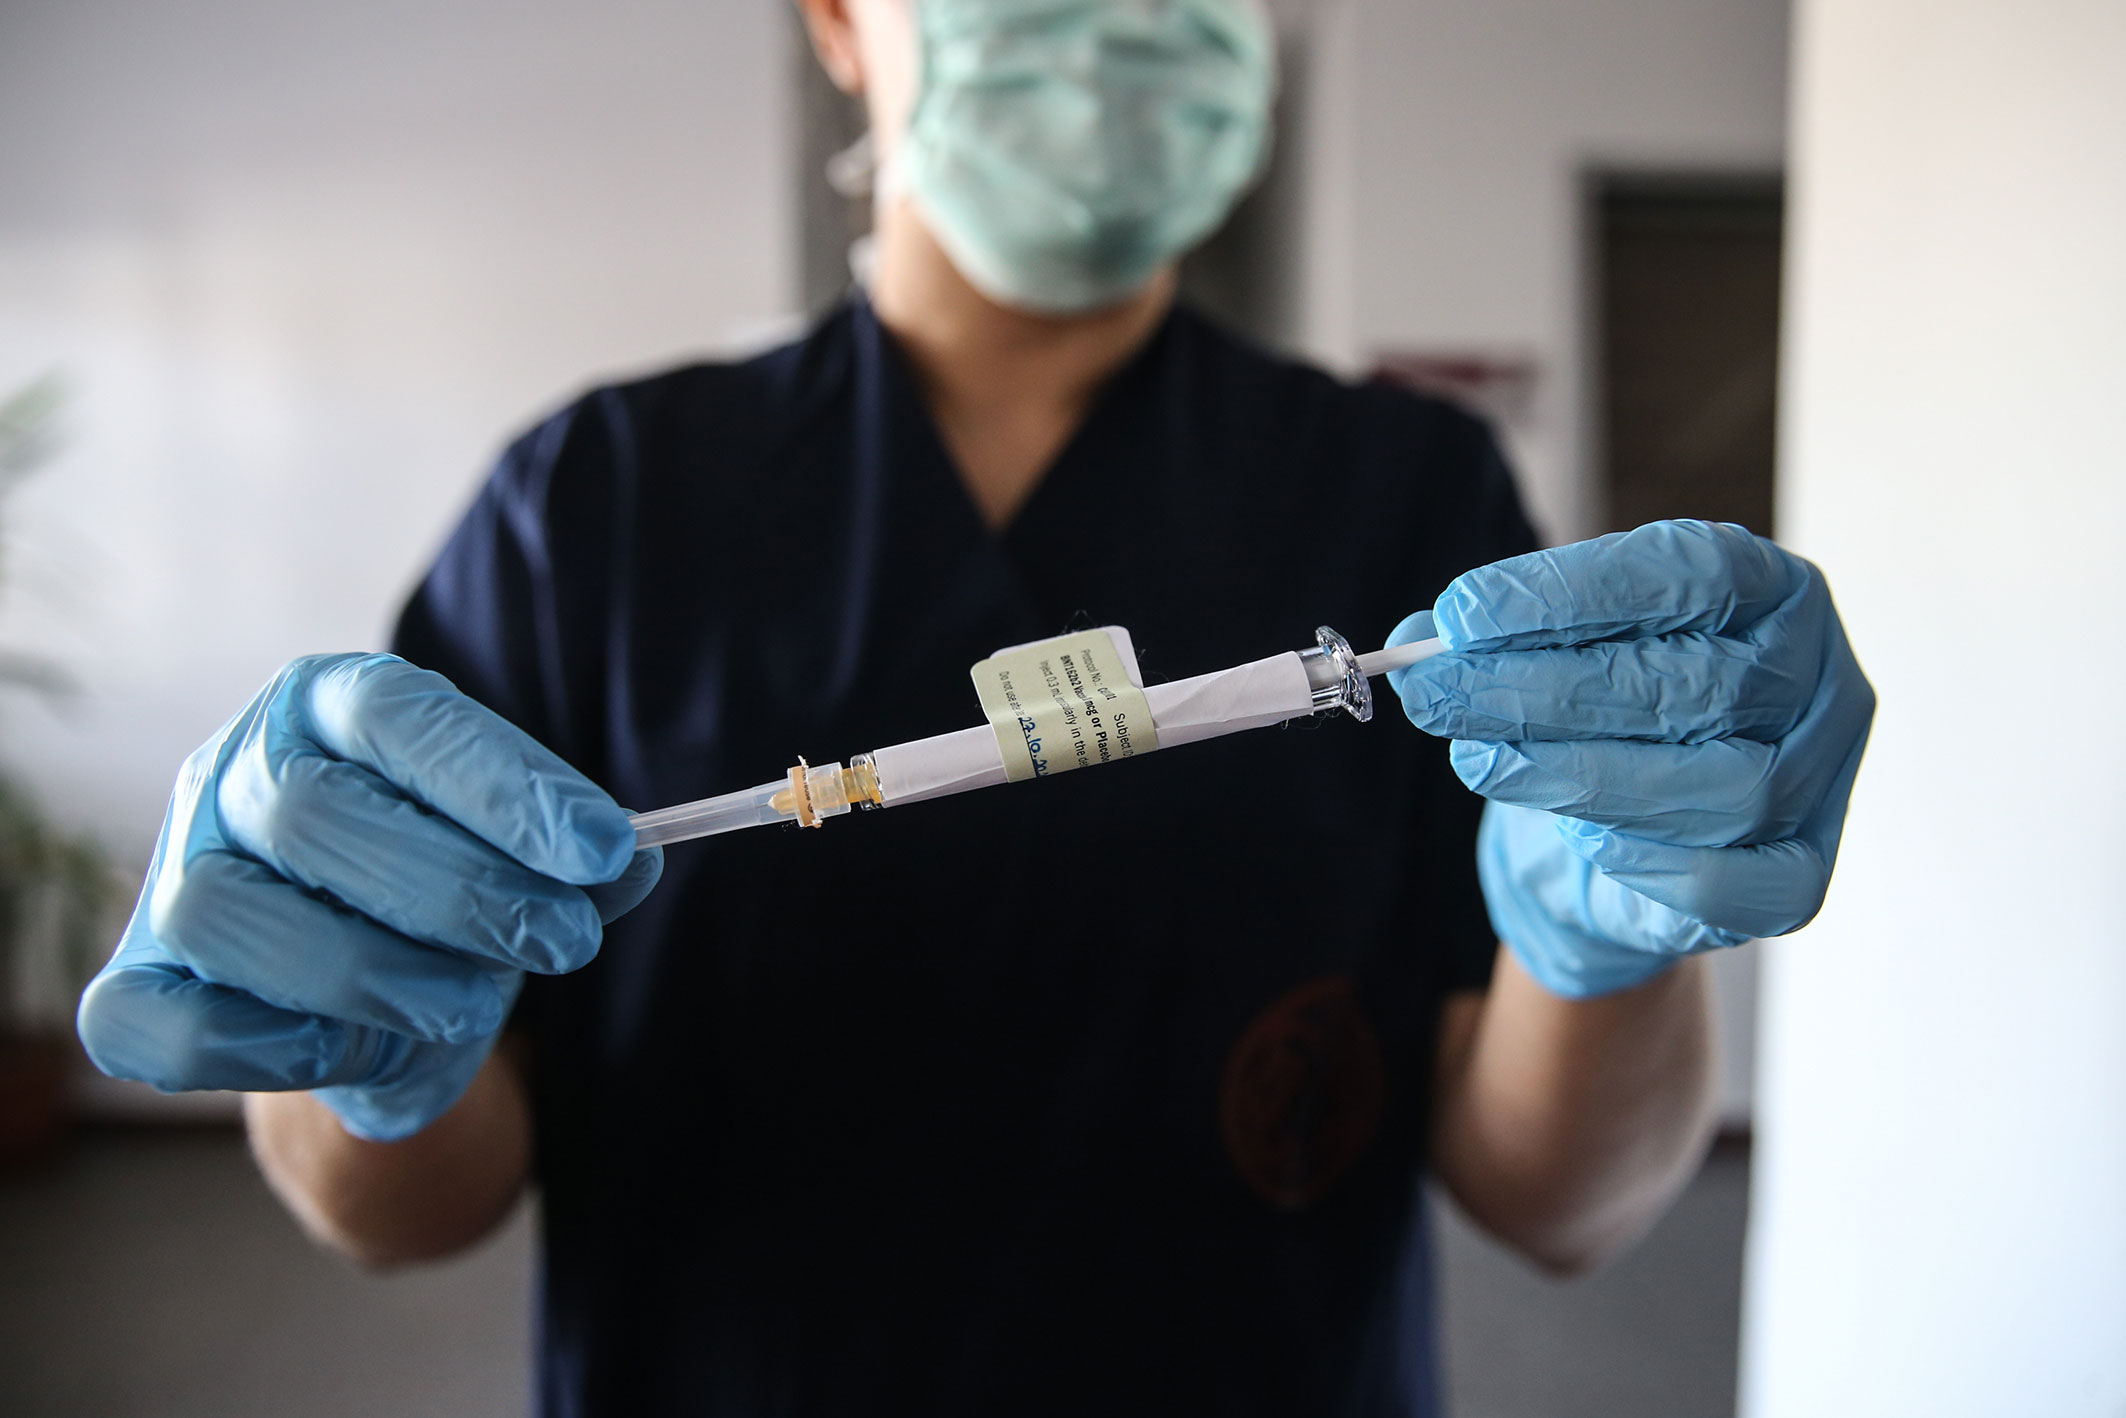 A health care worker holds an injection syringe of the phase 3 vaccine trial, developed against the novel coronavirus (COVID-19) pandemic by the U.S. Pfizer and German BioNTech company, at the Ankara University Ibni Sina Hospital in Ankara, Turkey